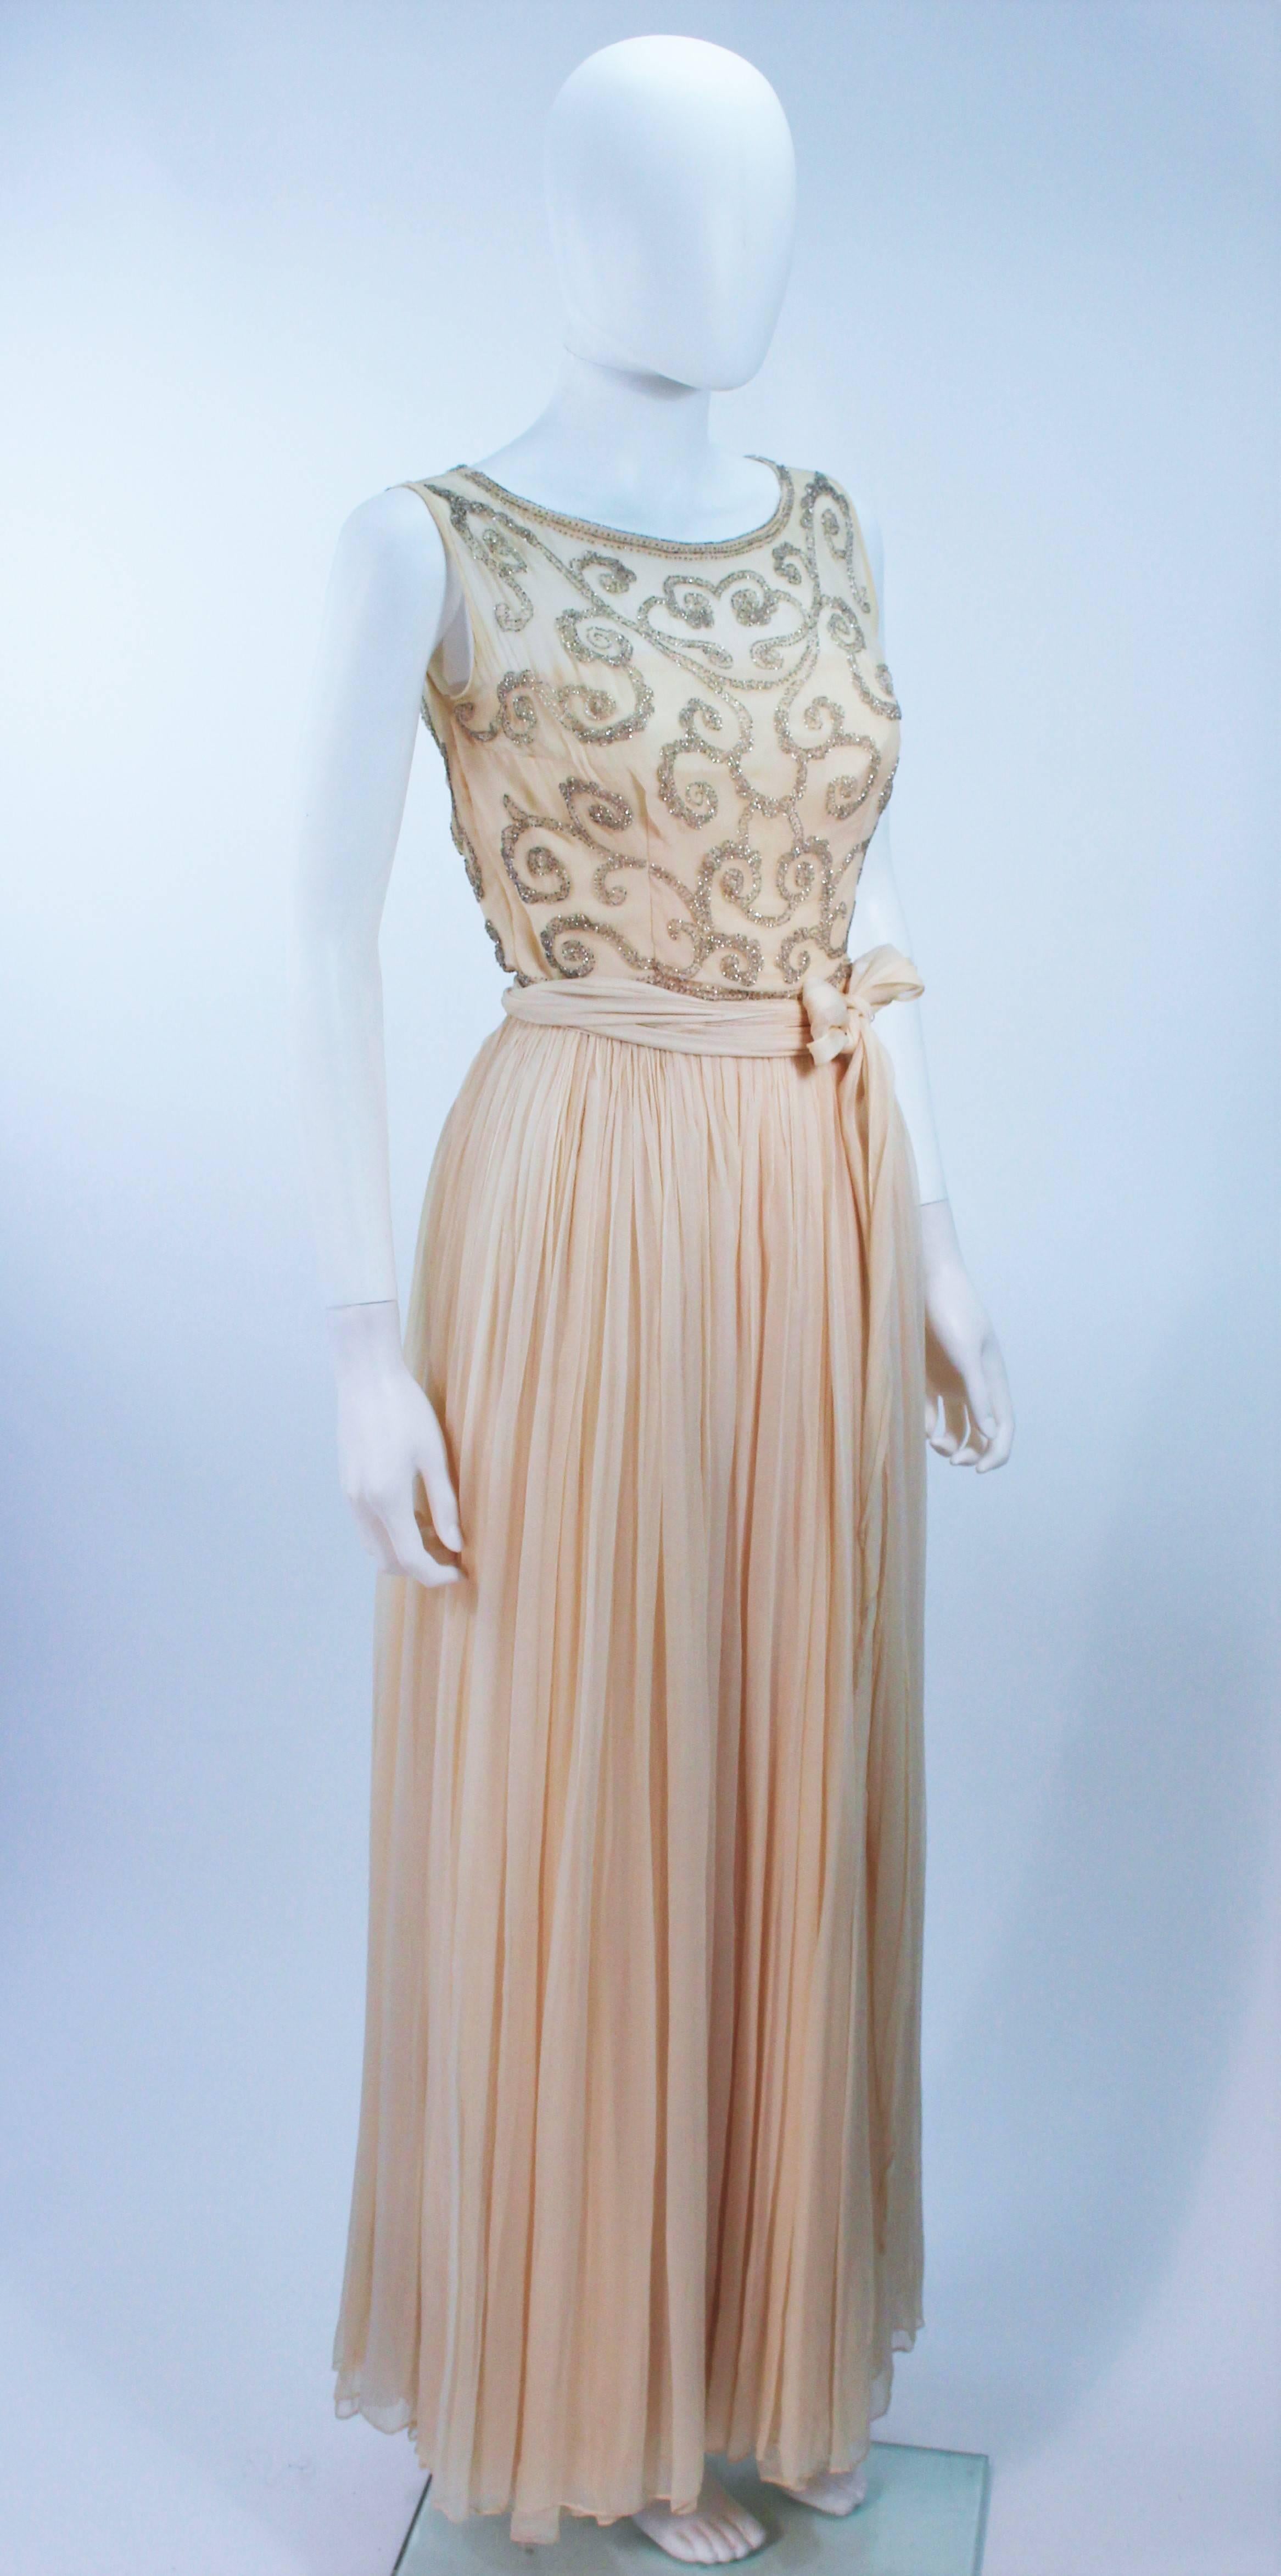 Women's 1960's Vintage Buttercream Chiffon Gown with Embellished Bodice Size 2 For Sale